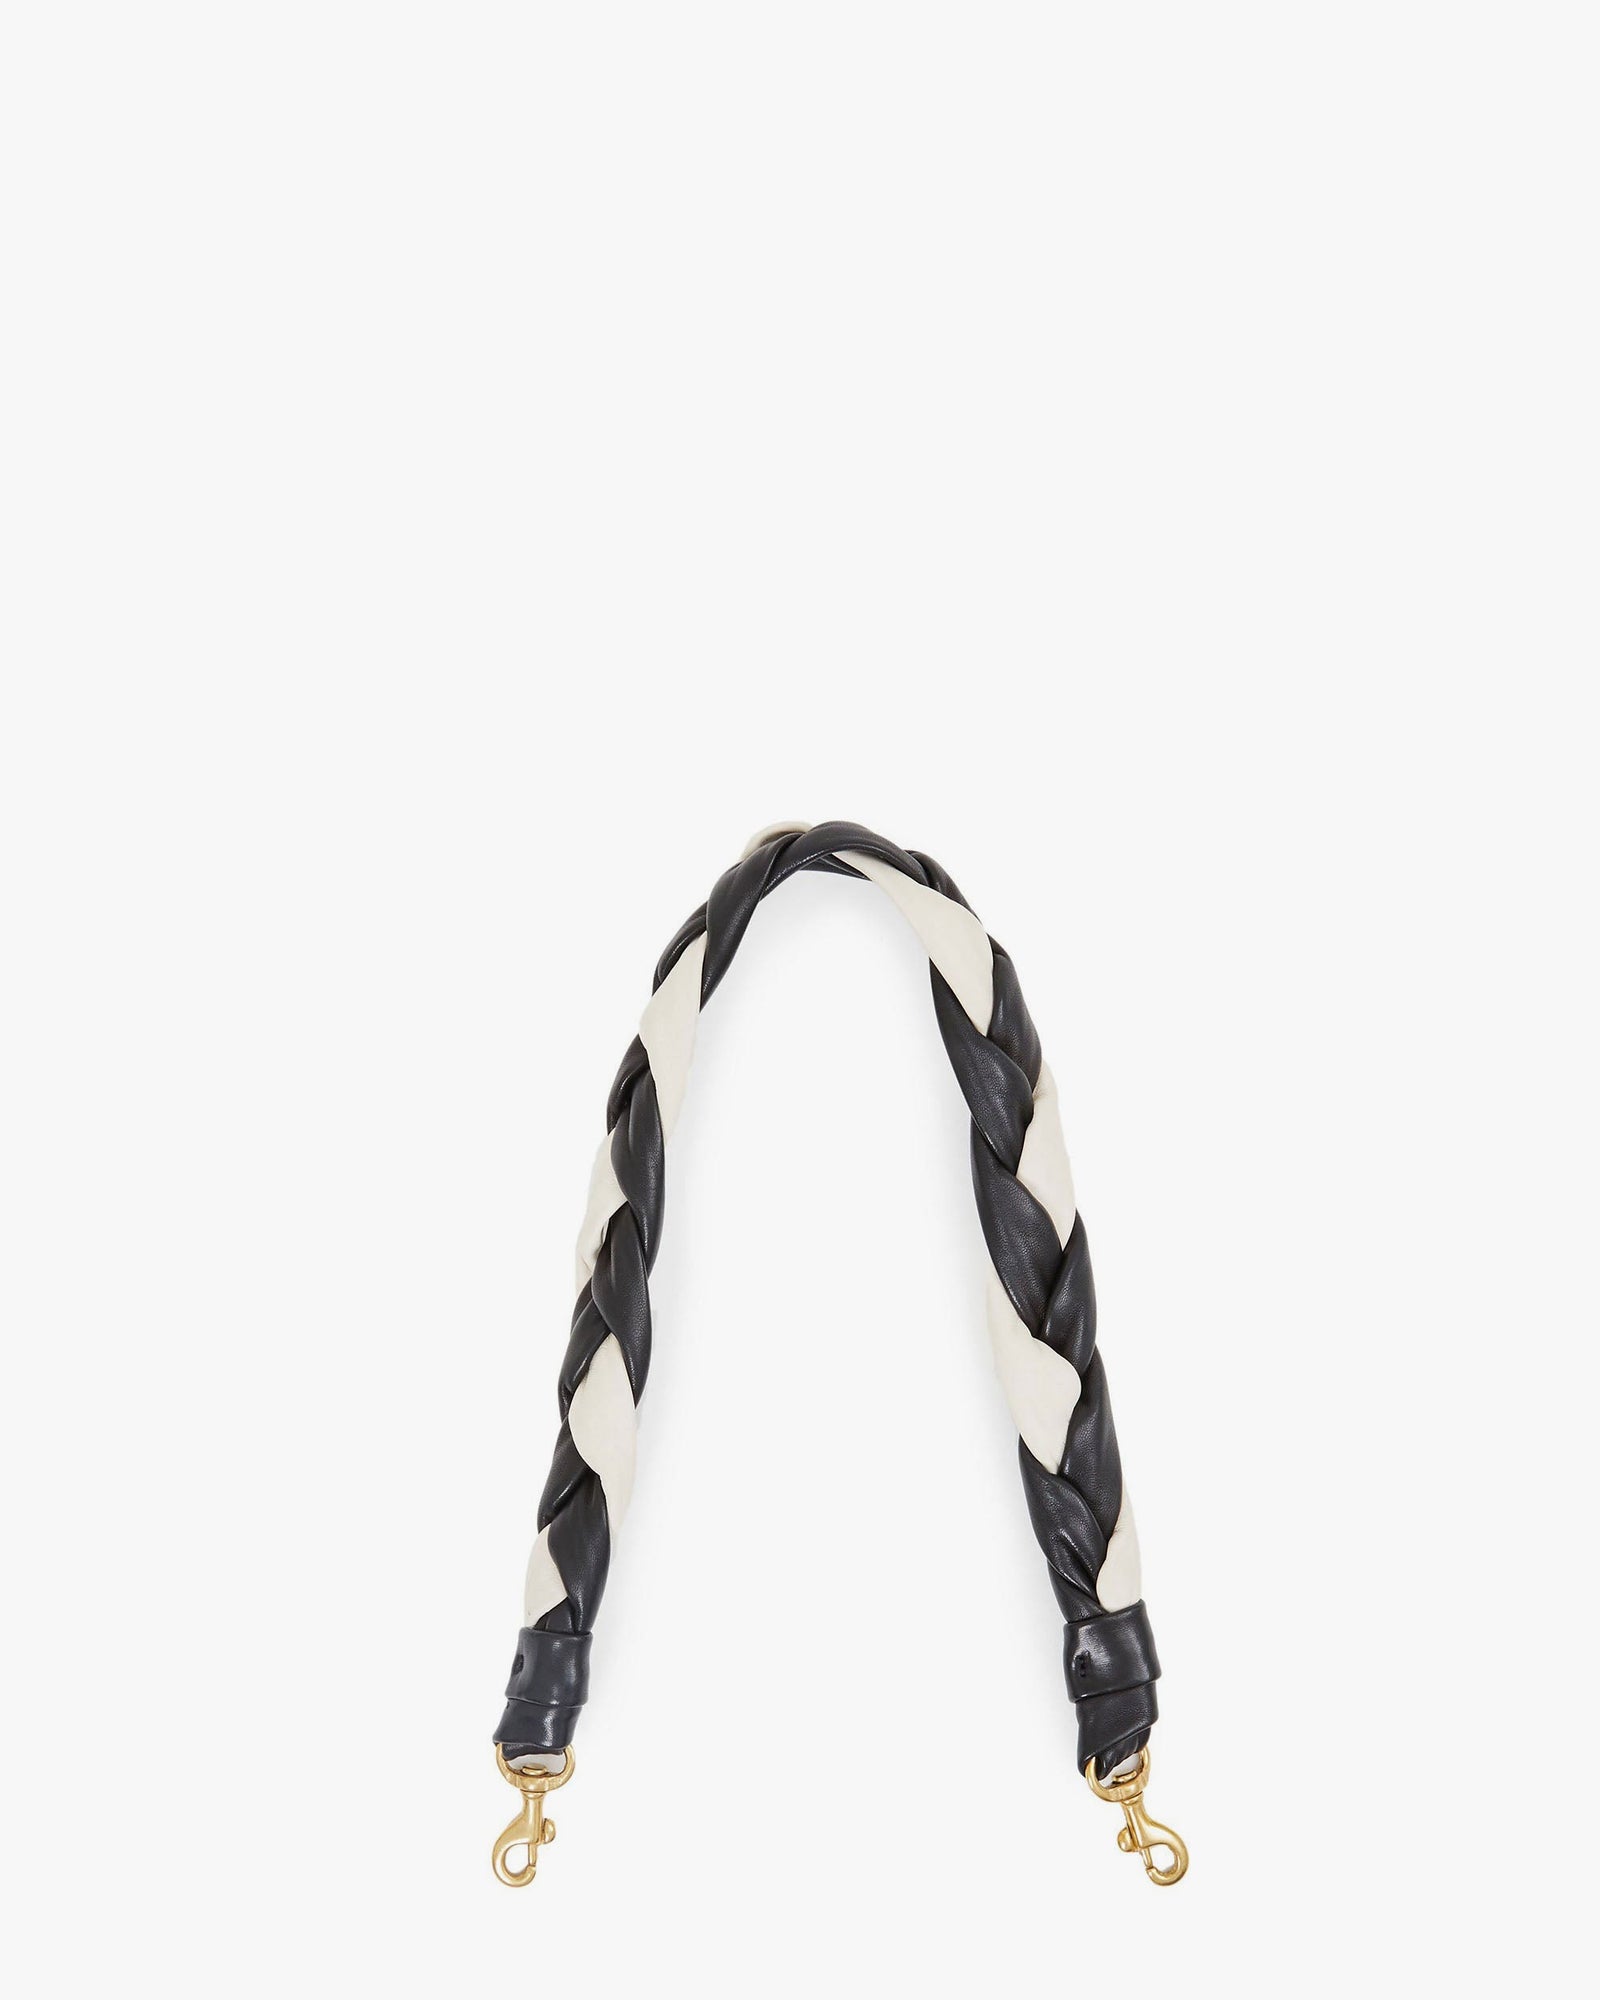  Black and Cream Italian Nappa Braided Leather Shoulder Strap - Front